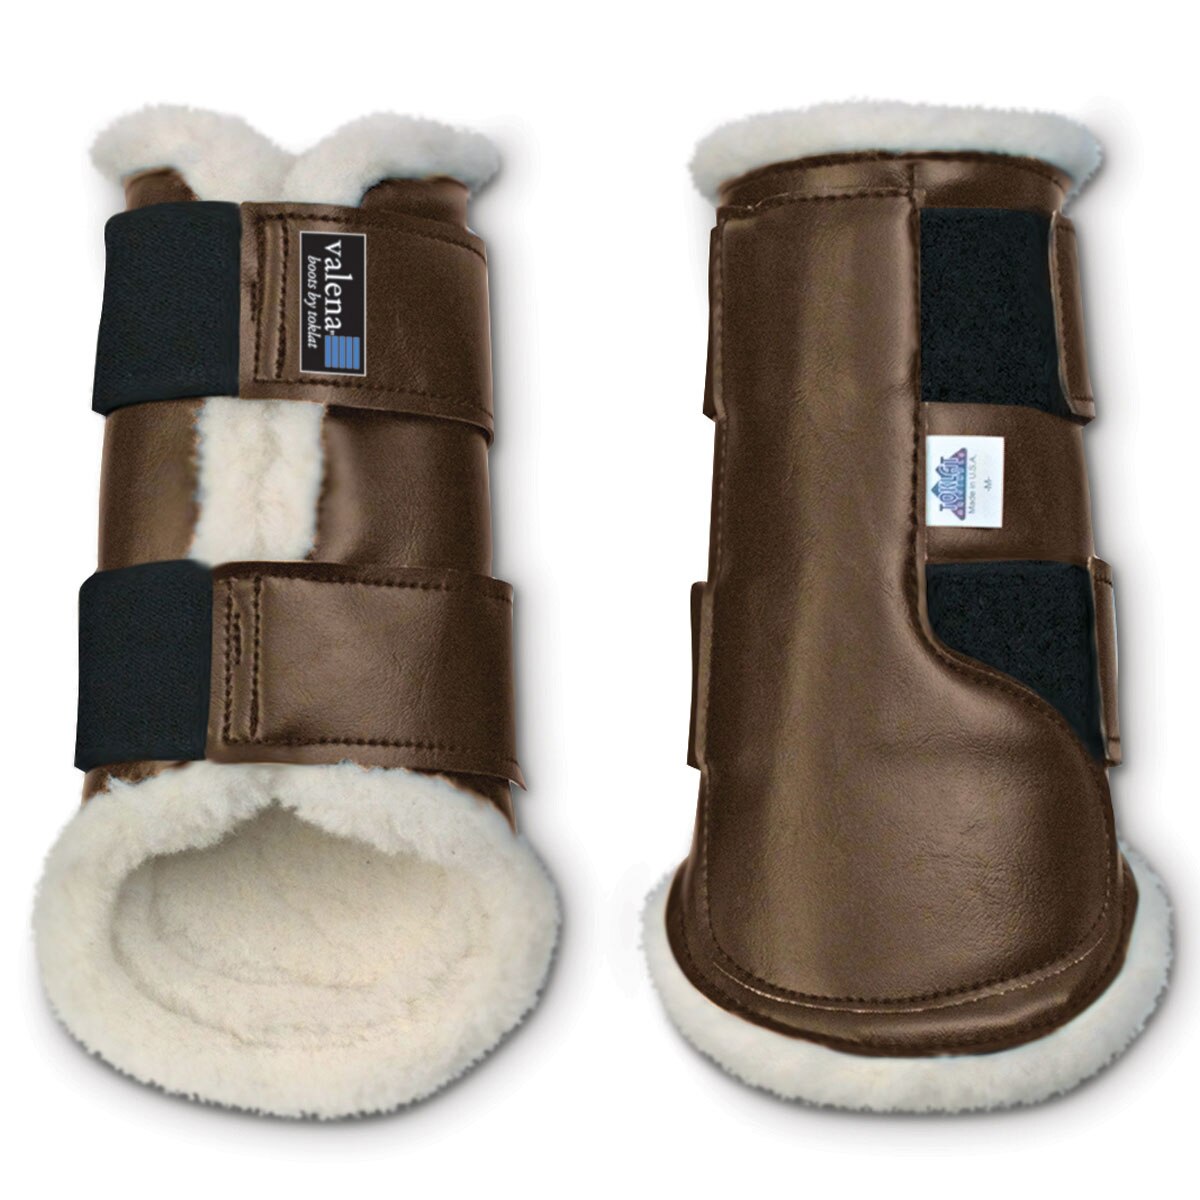 Fleece horse working in boots full set of 4 boots,stable boots lined with brown 